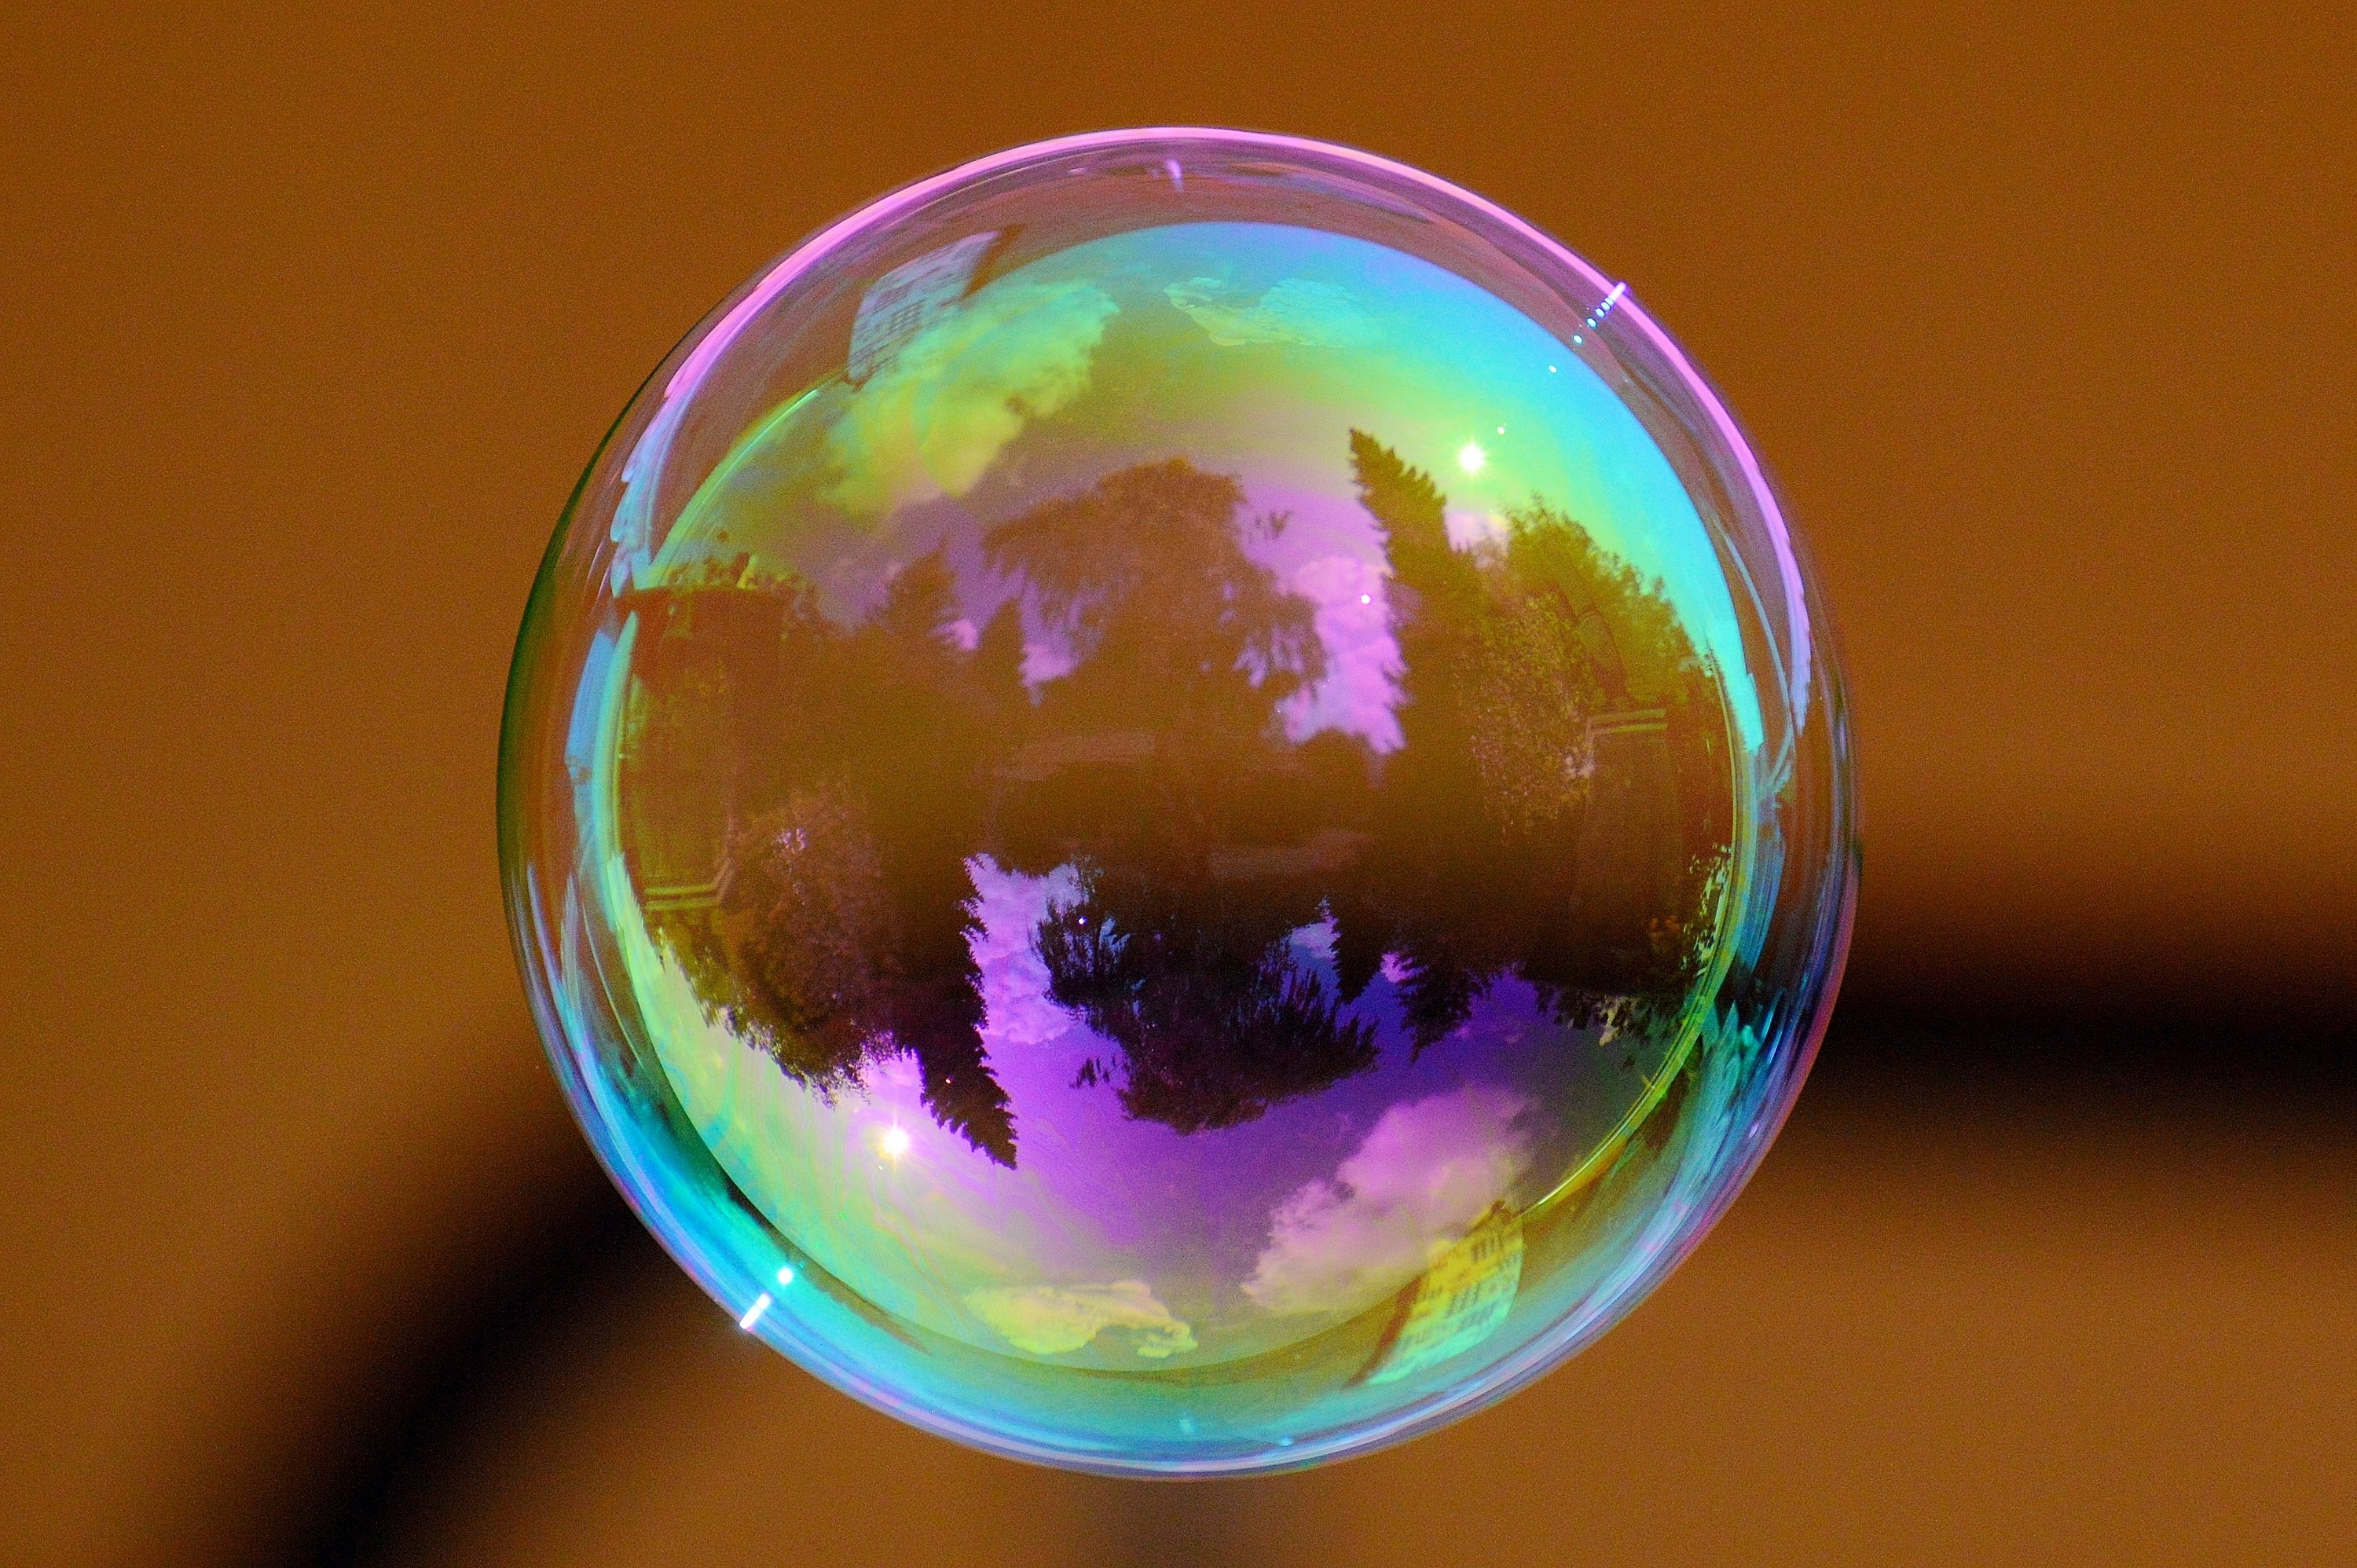 Free photo The soap bubble shimmers with multicolored colors